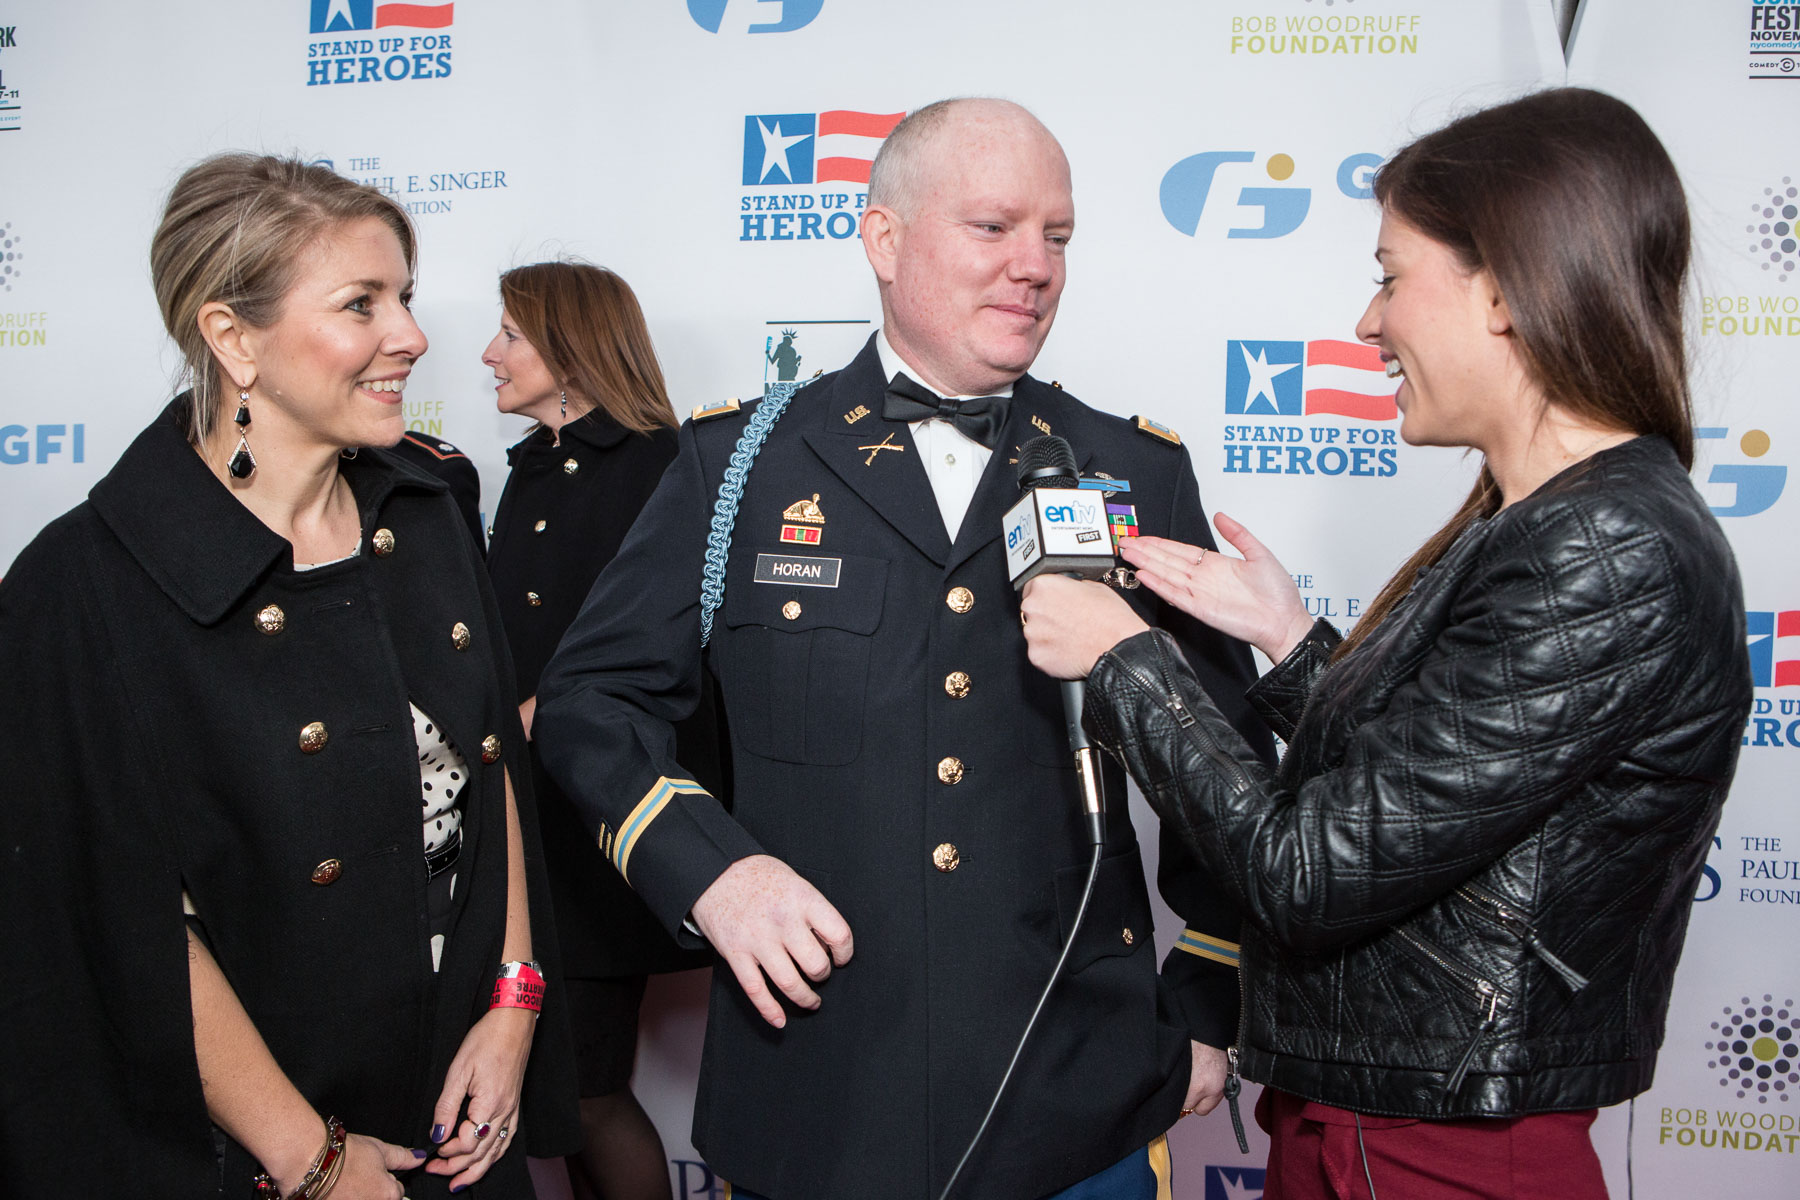 An army Captain being interviewed by a reporter at a Stand Up for Heroes event in New York